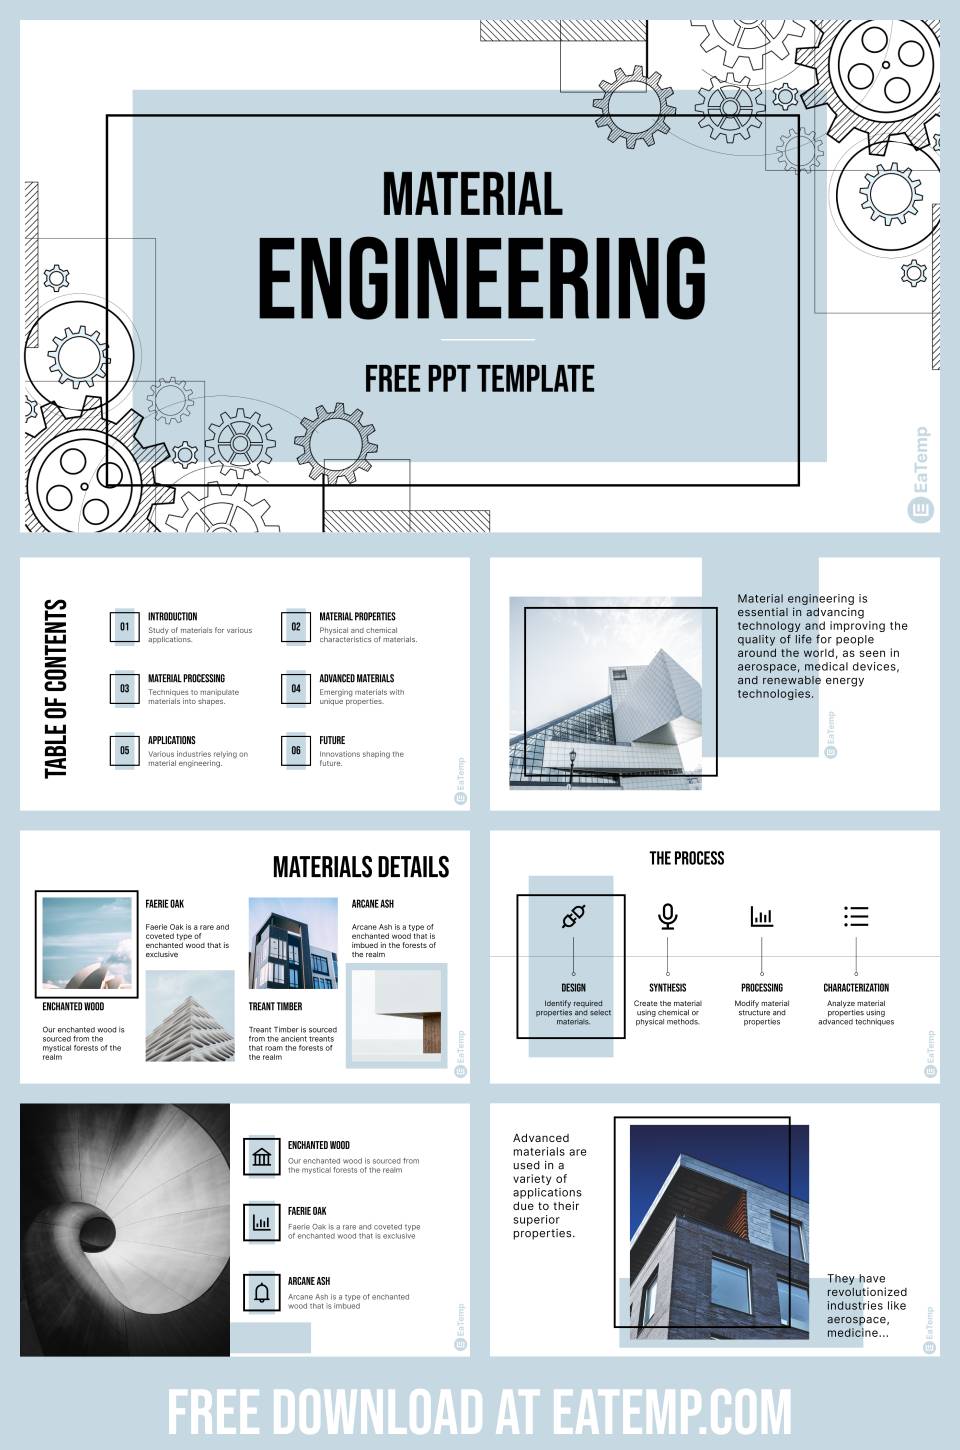 Material Engineering PPT Template Details